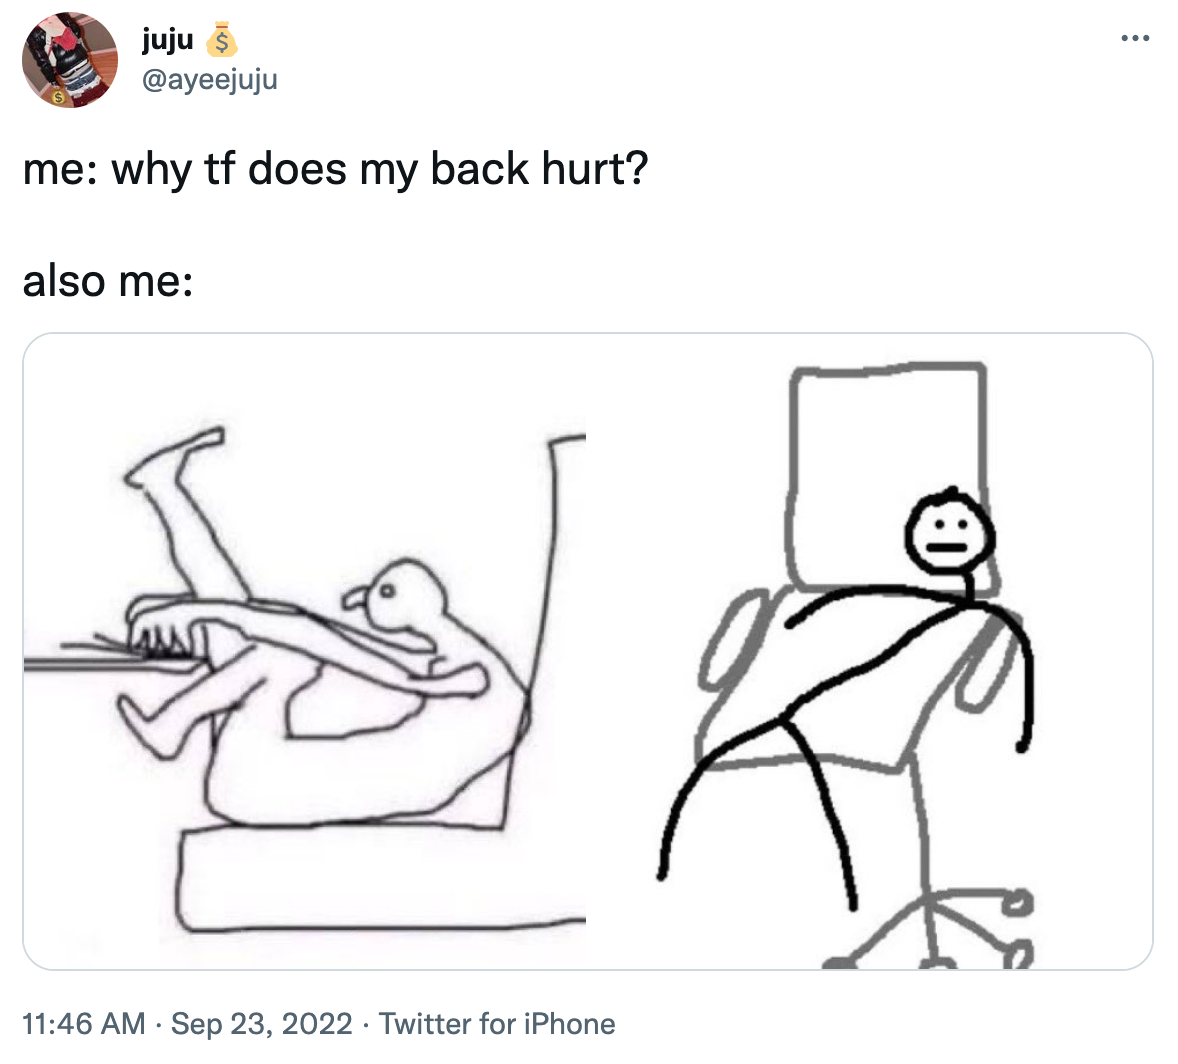 A tweet asking "why the fuck does my back hurt," followed by two pictures of stick figures in various uncomfortable sprawling positions in chairs.